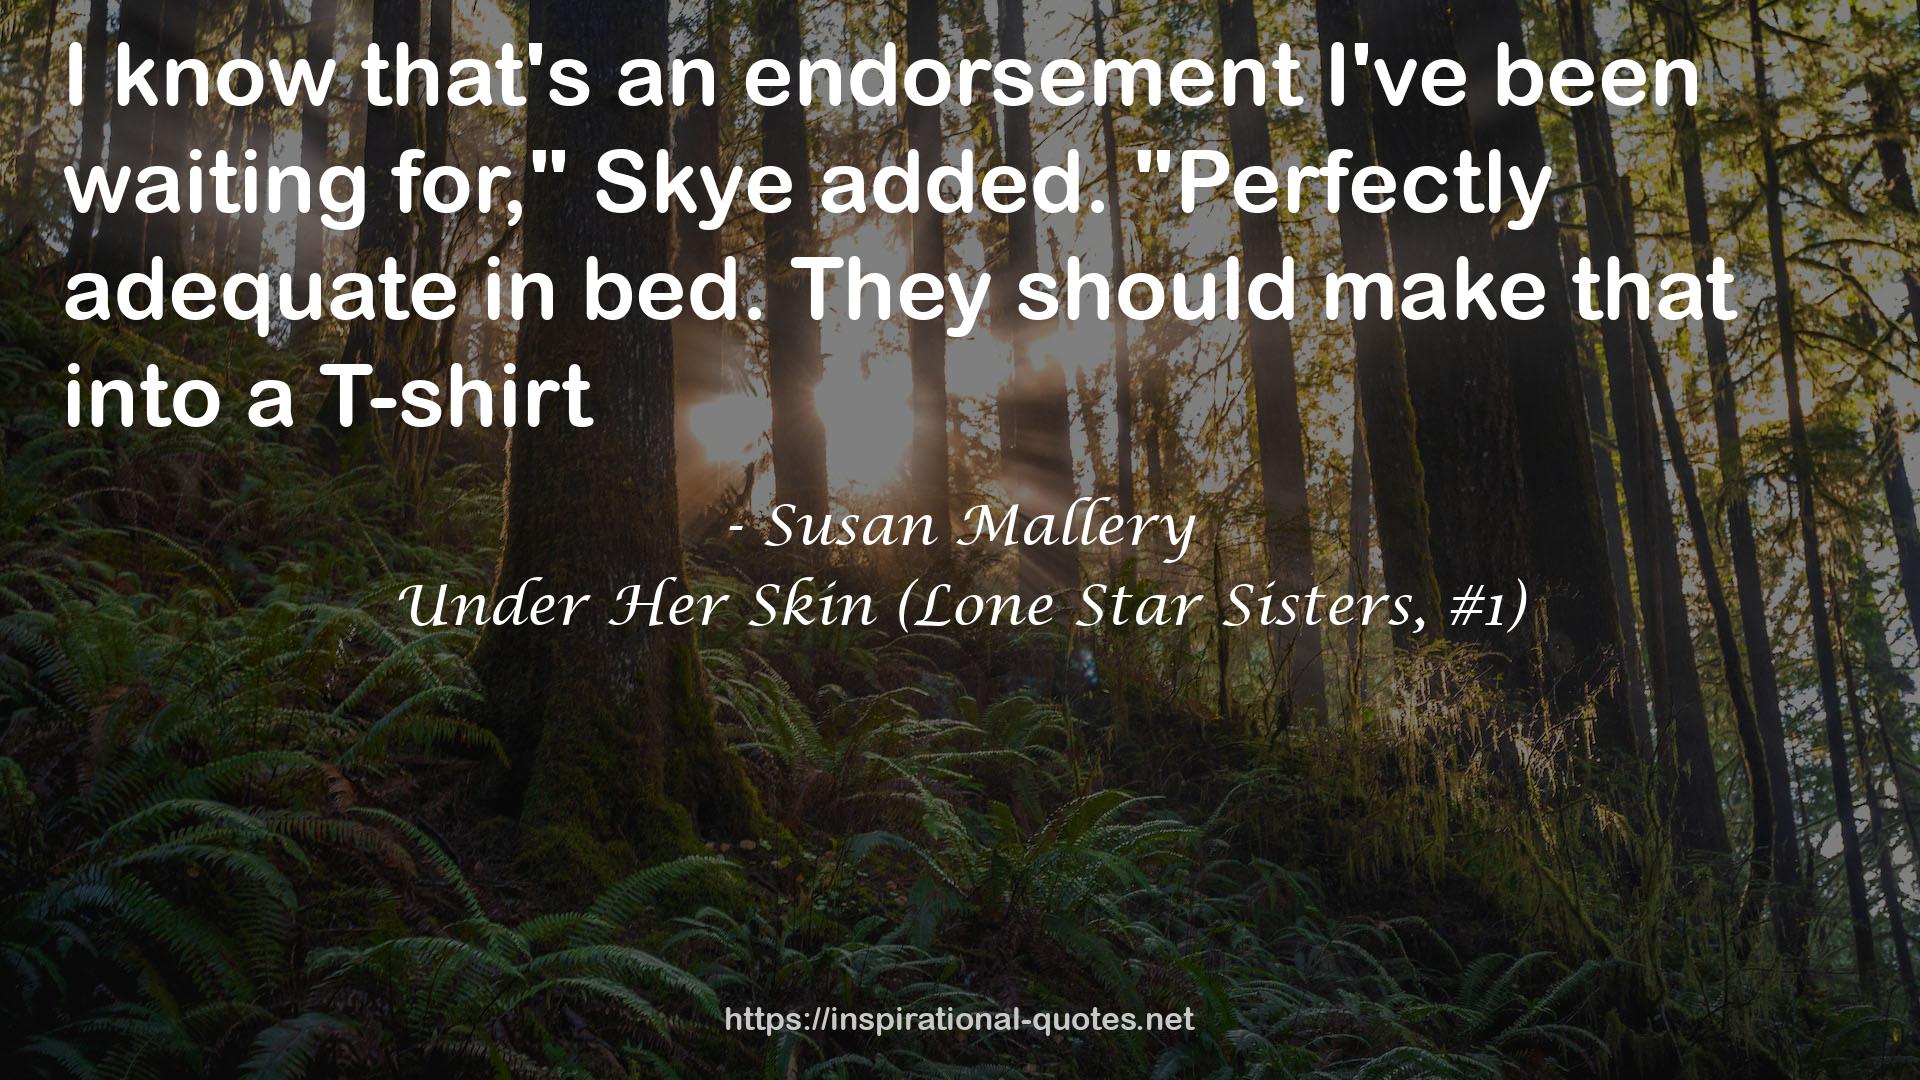 Under Her Skin (Lone Star Sisters, #1) QUOTES